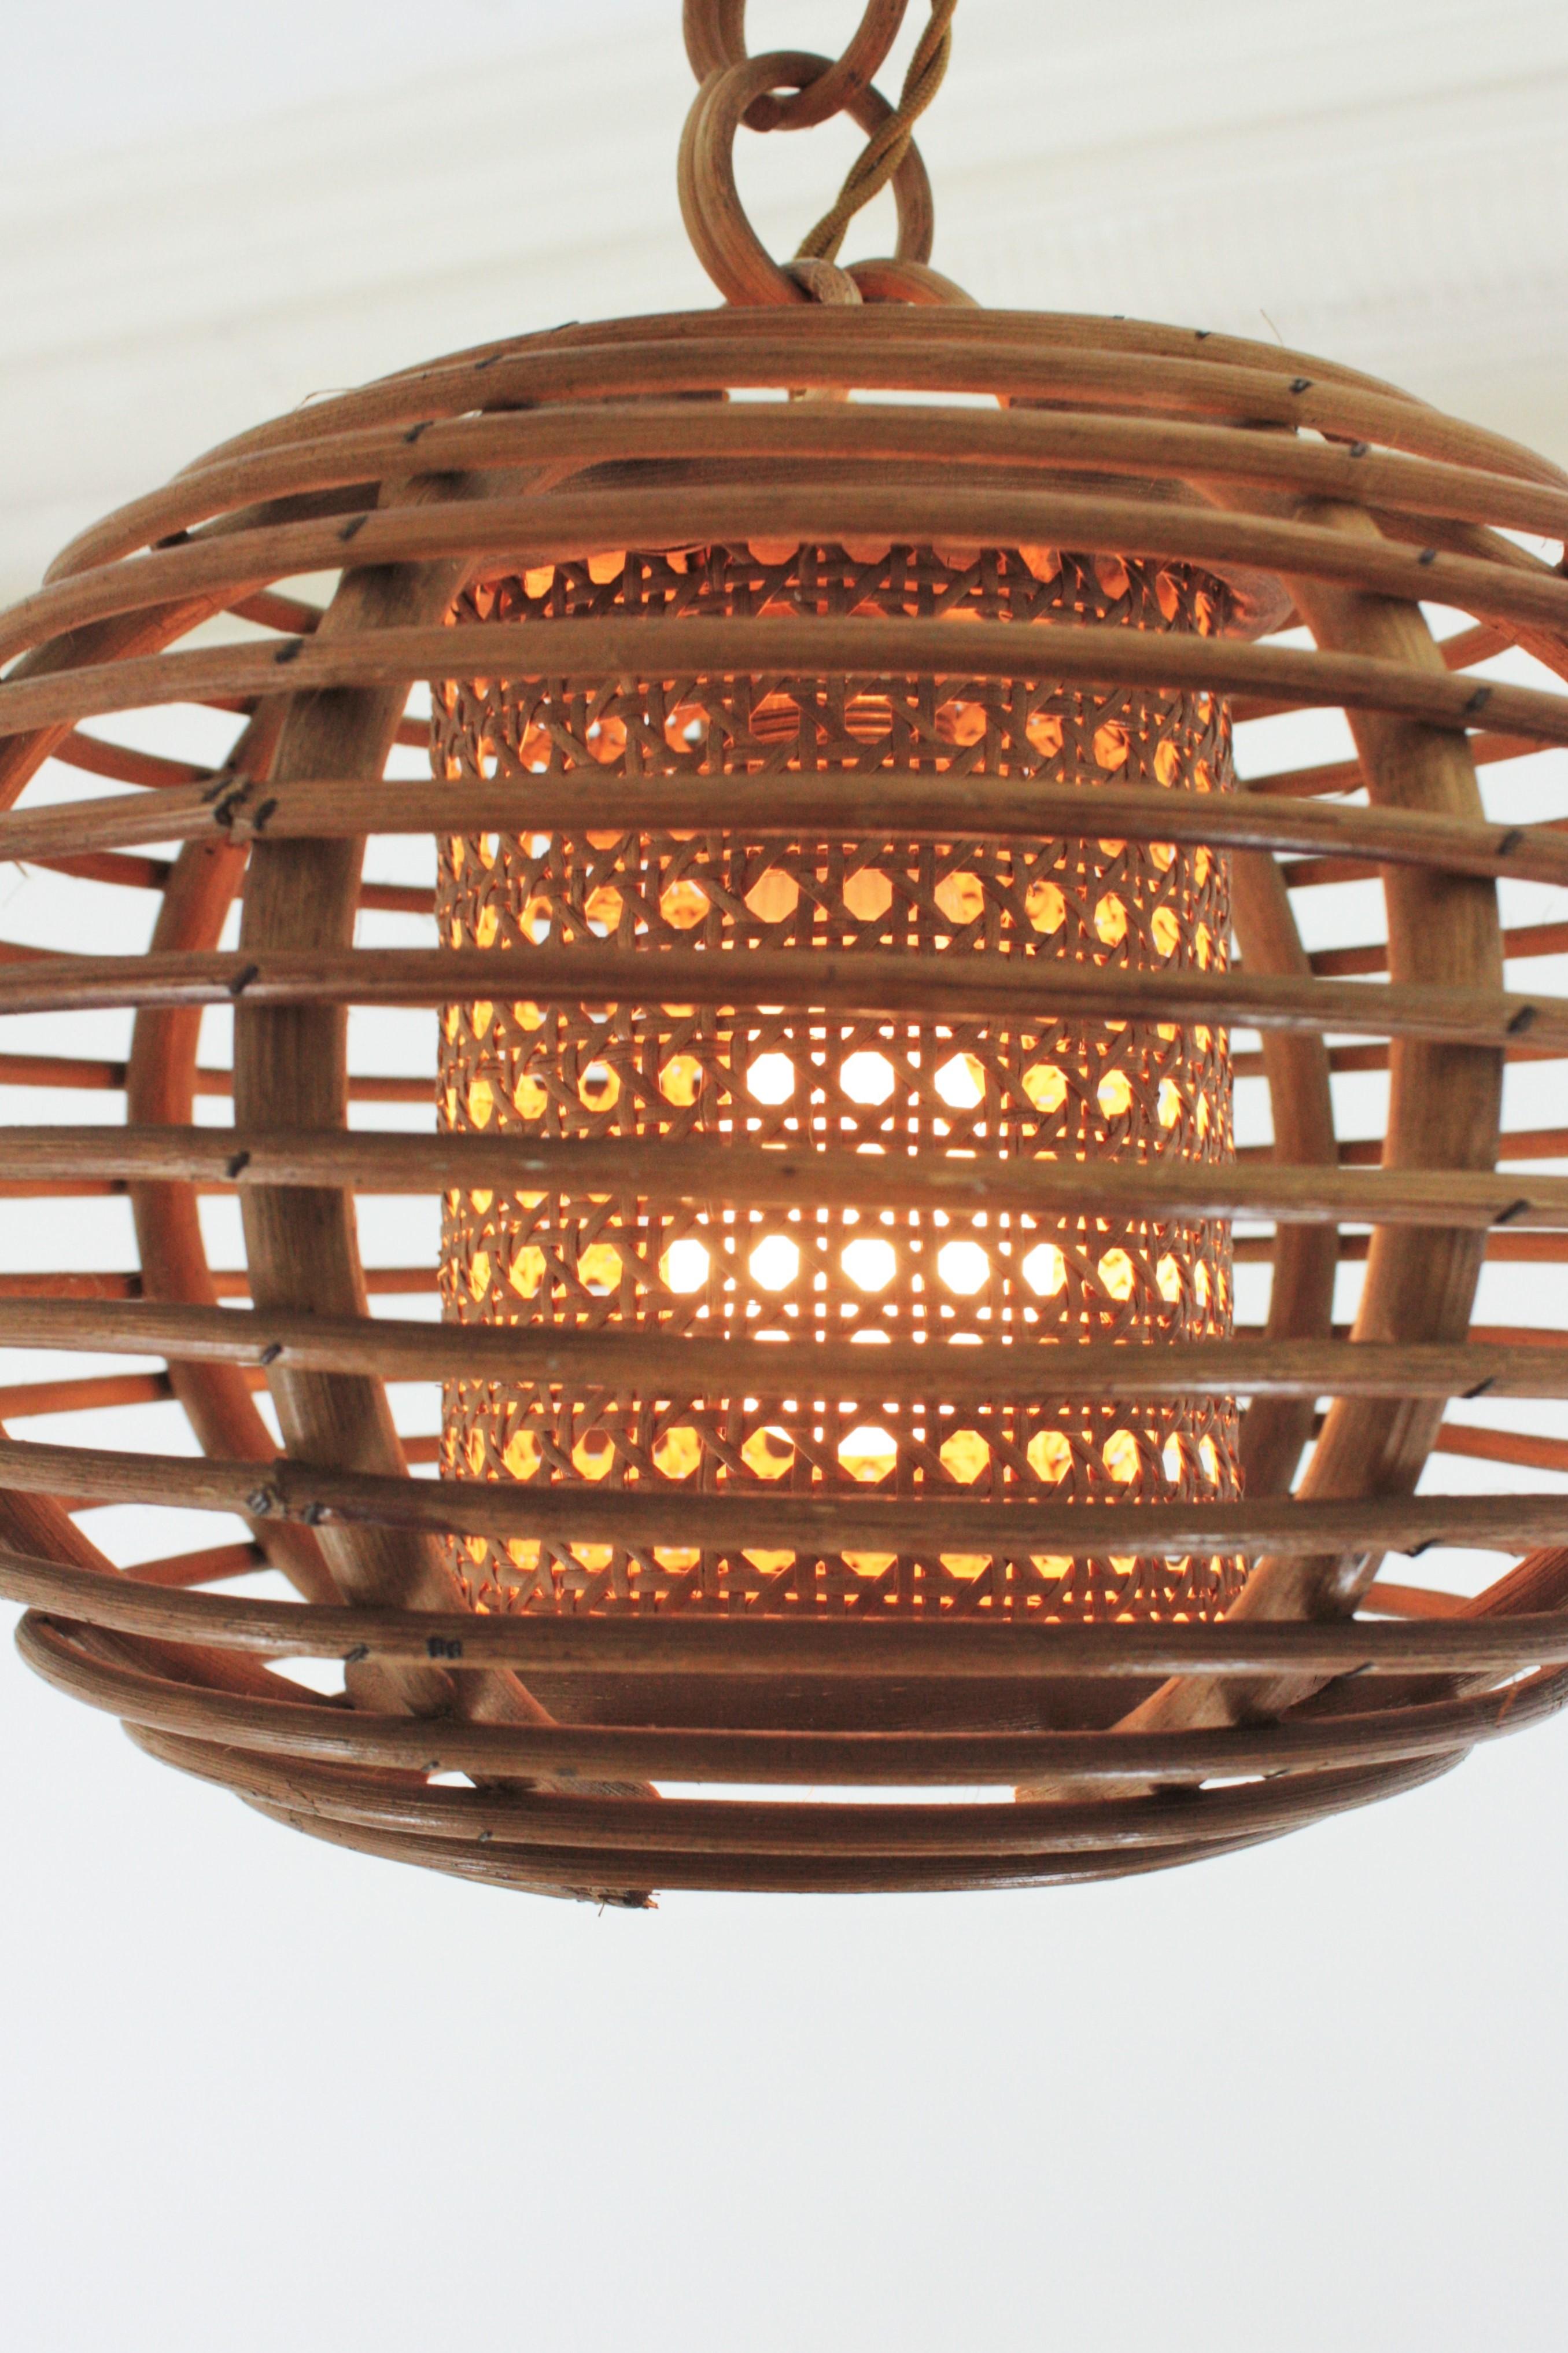 Hand-Crafted Rattan Wicker Globe Pendant Hanging Light, 1950s For Sale